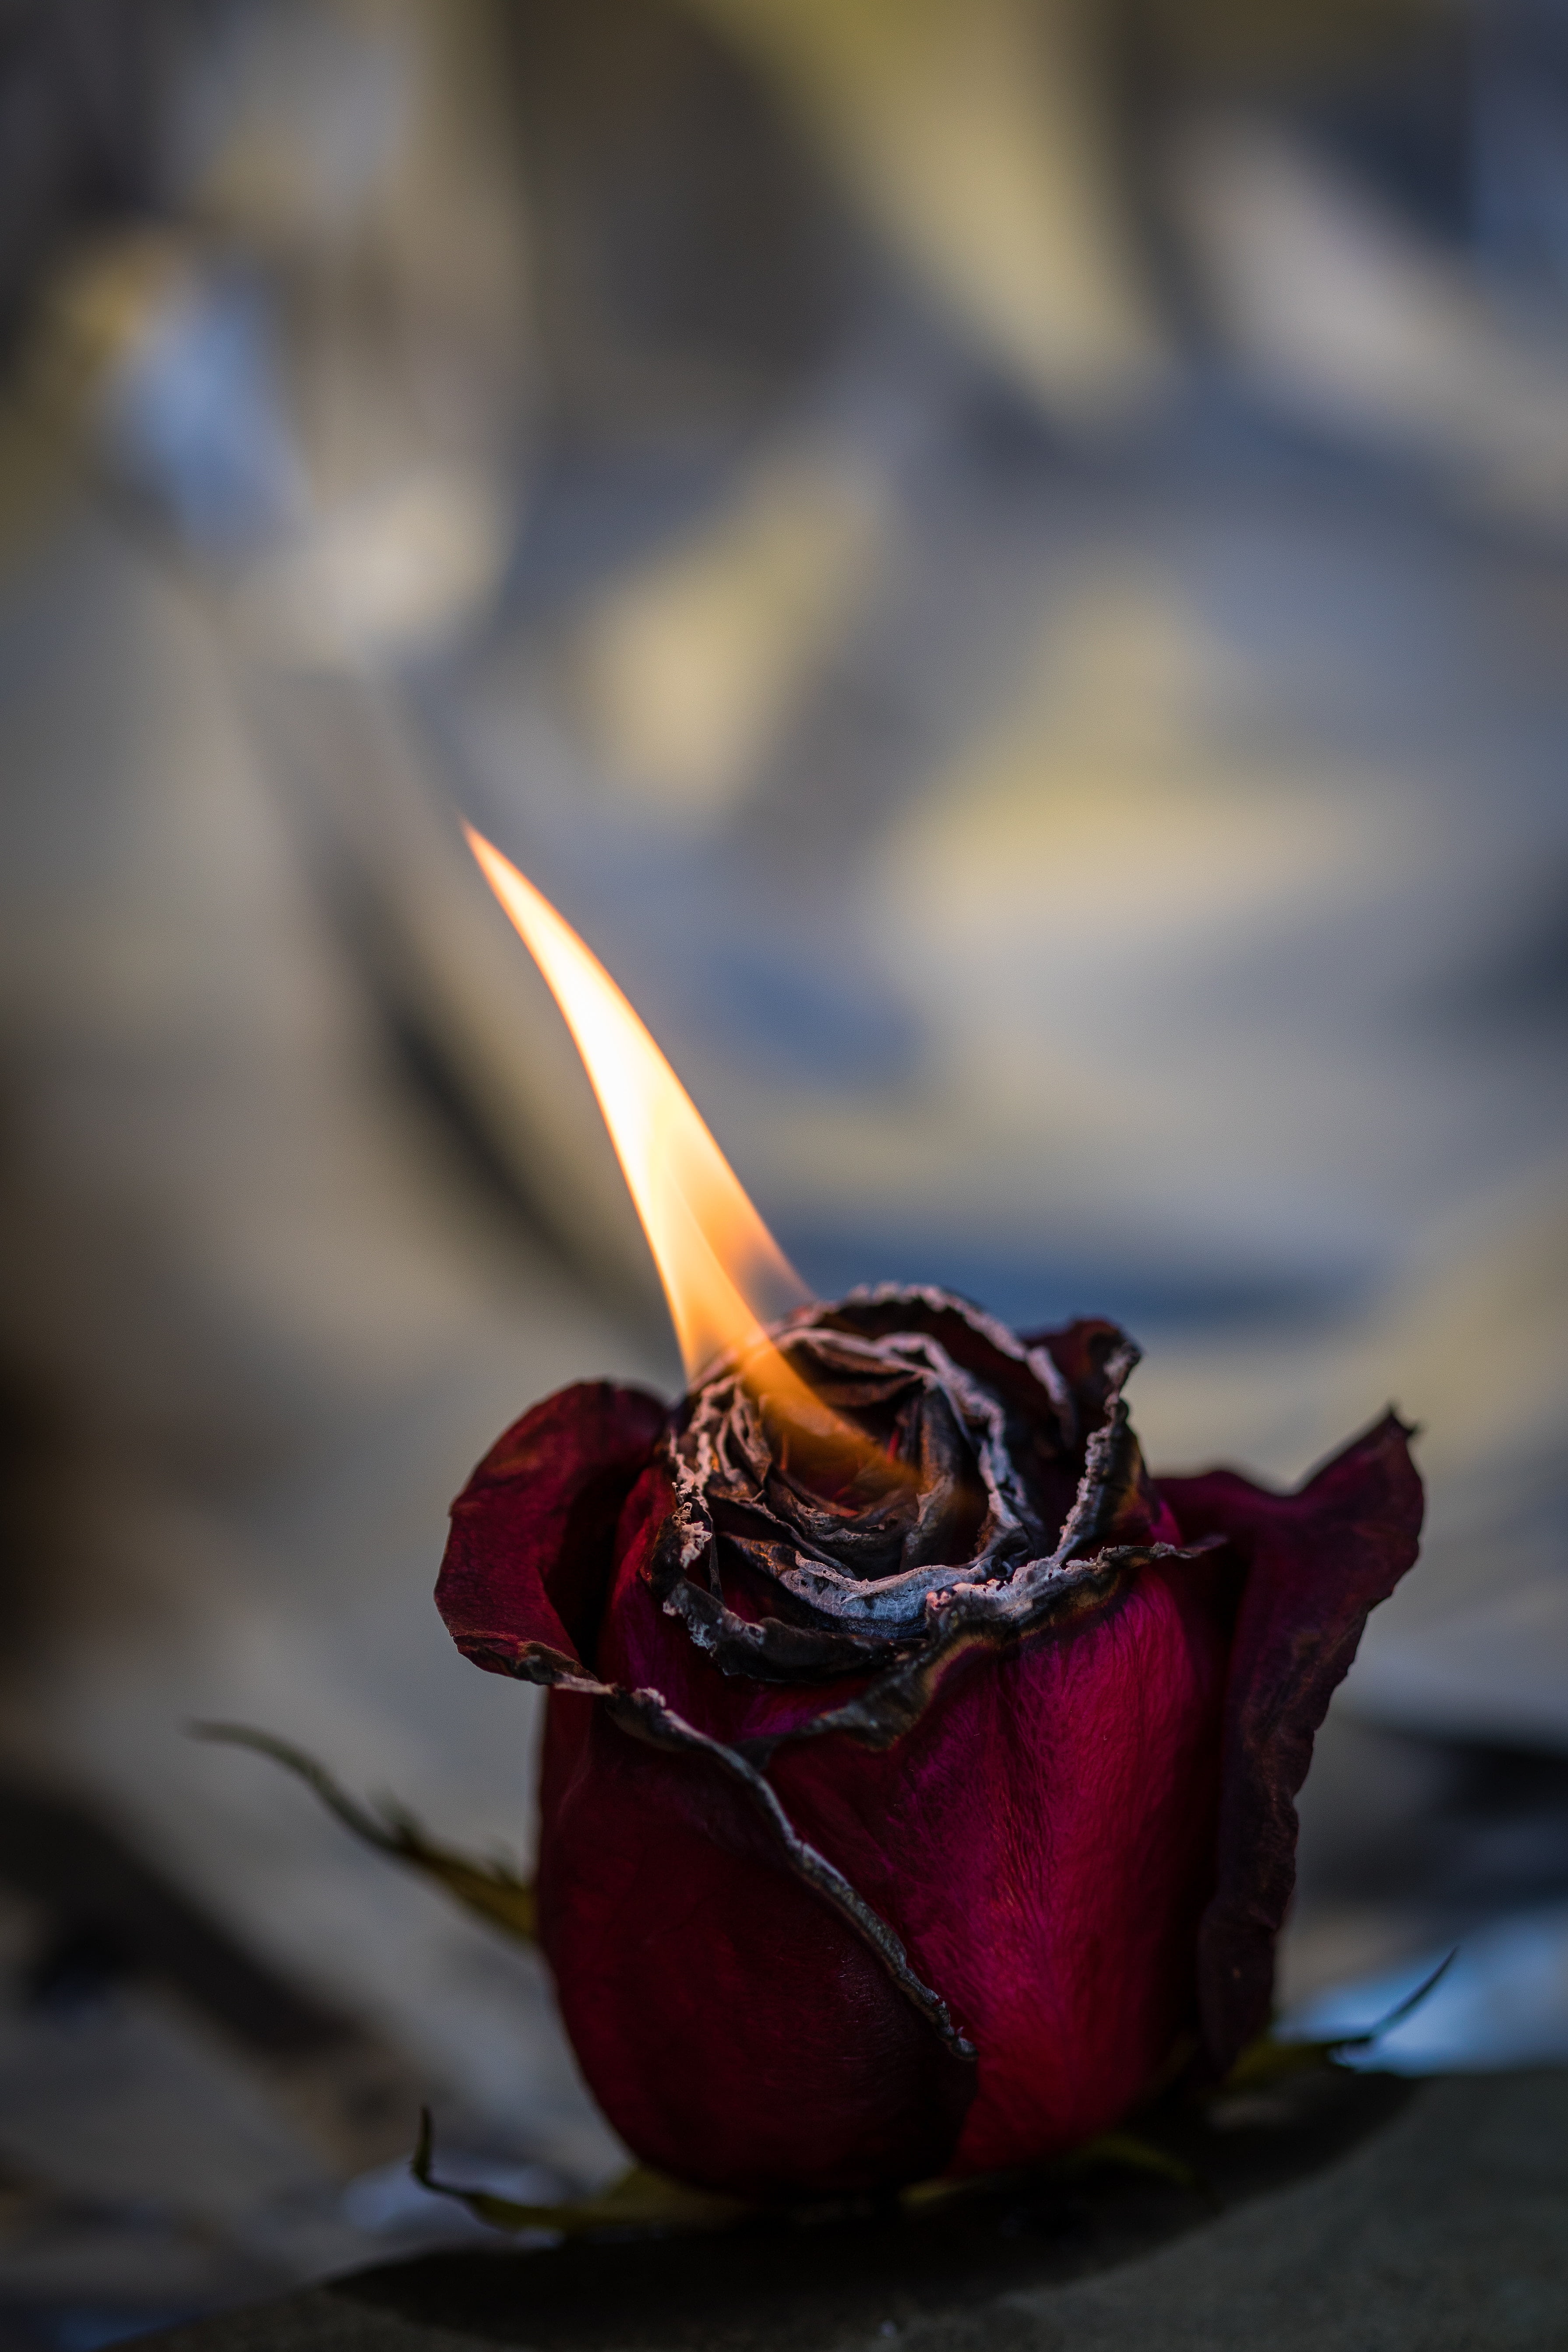 burned red rose flower, fire, bud, flame, fire - Natural Phenomenon